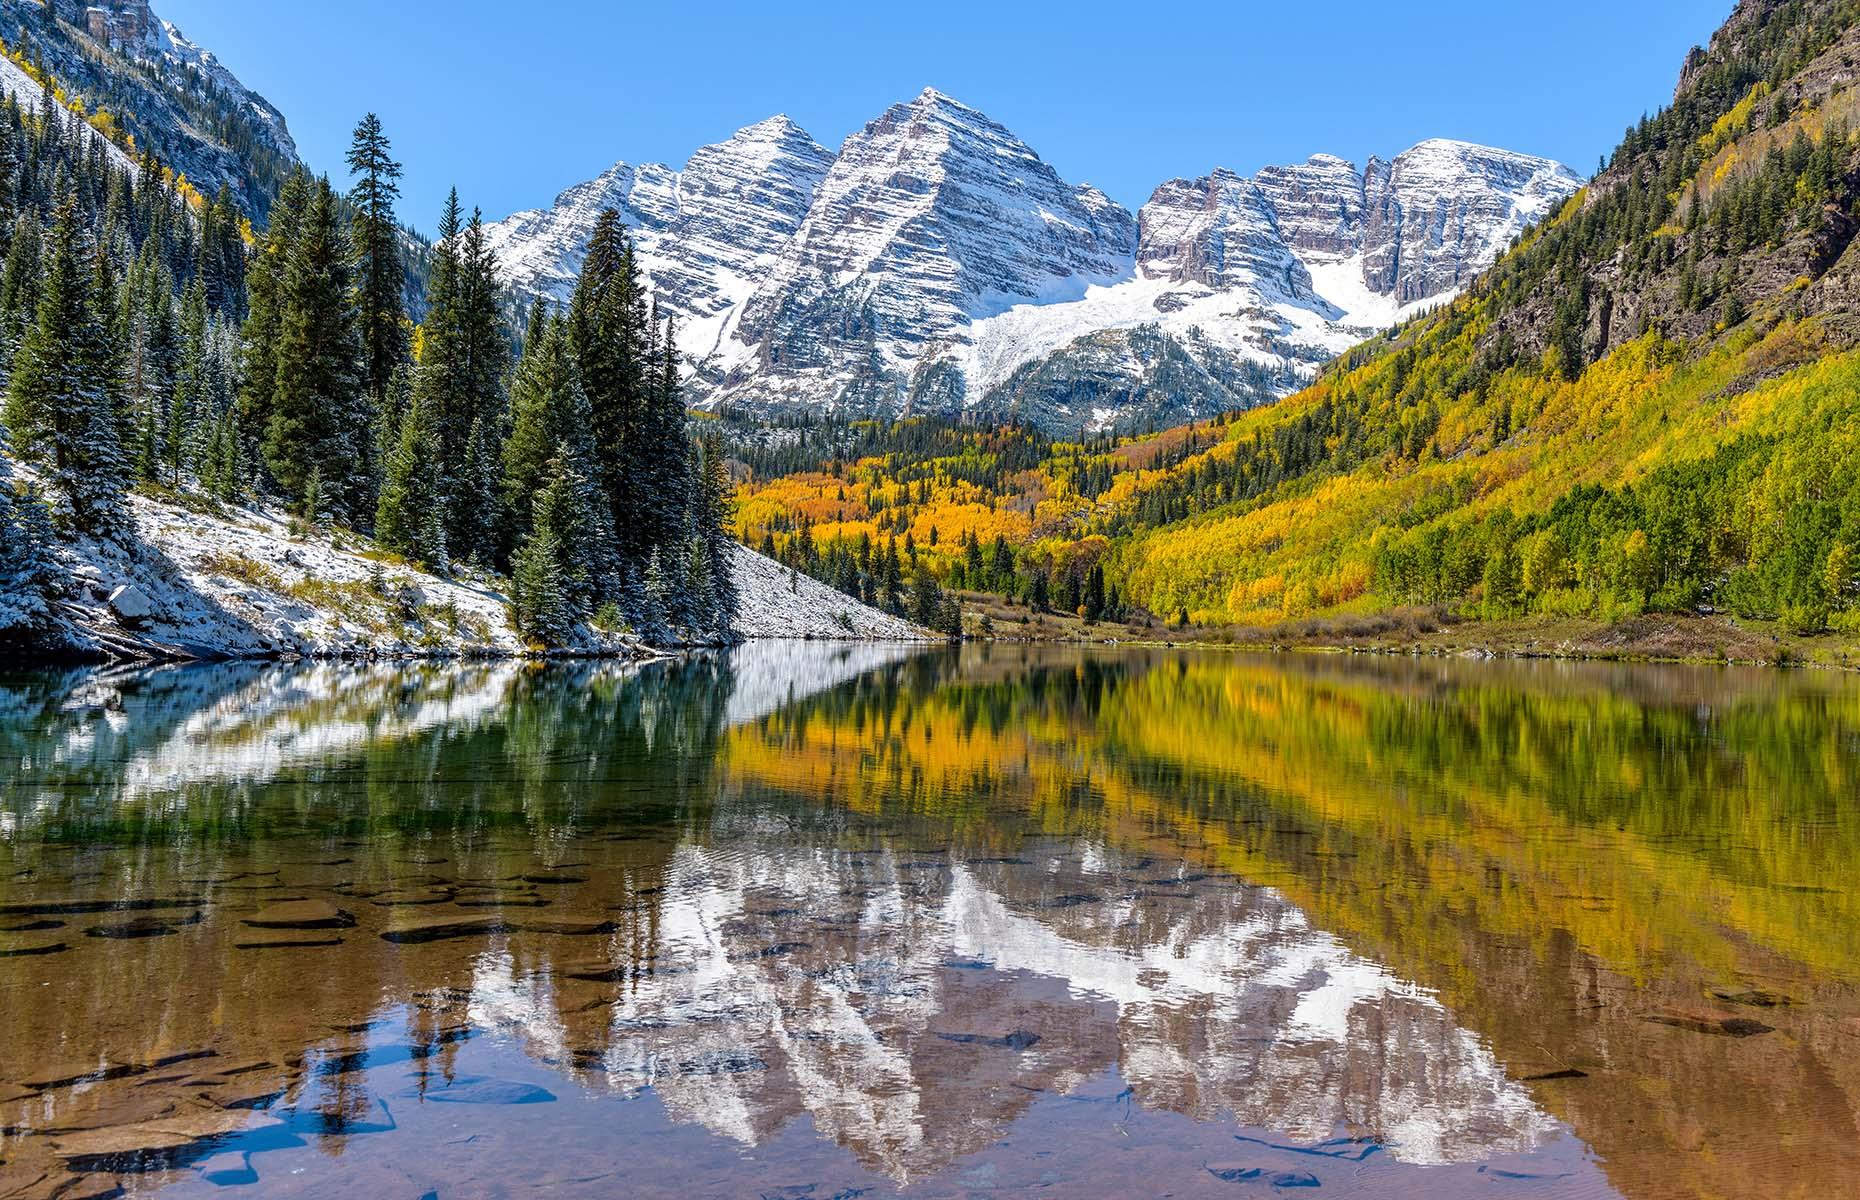 The Elk Mountains in Colorado are crammed full with inspiring viewpoints and enchanting landscapes. Yet of all of them, nowhere is quite like the Maroon Bells. Two of the highest peaks in the region, these soaring mountains reflect in Crater Lake during sunny days, creating a natural mirror that captures this untouched landscape.